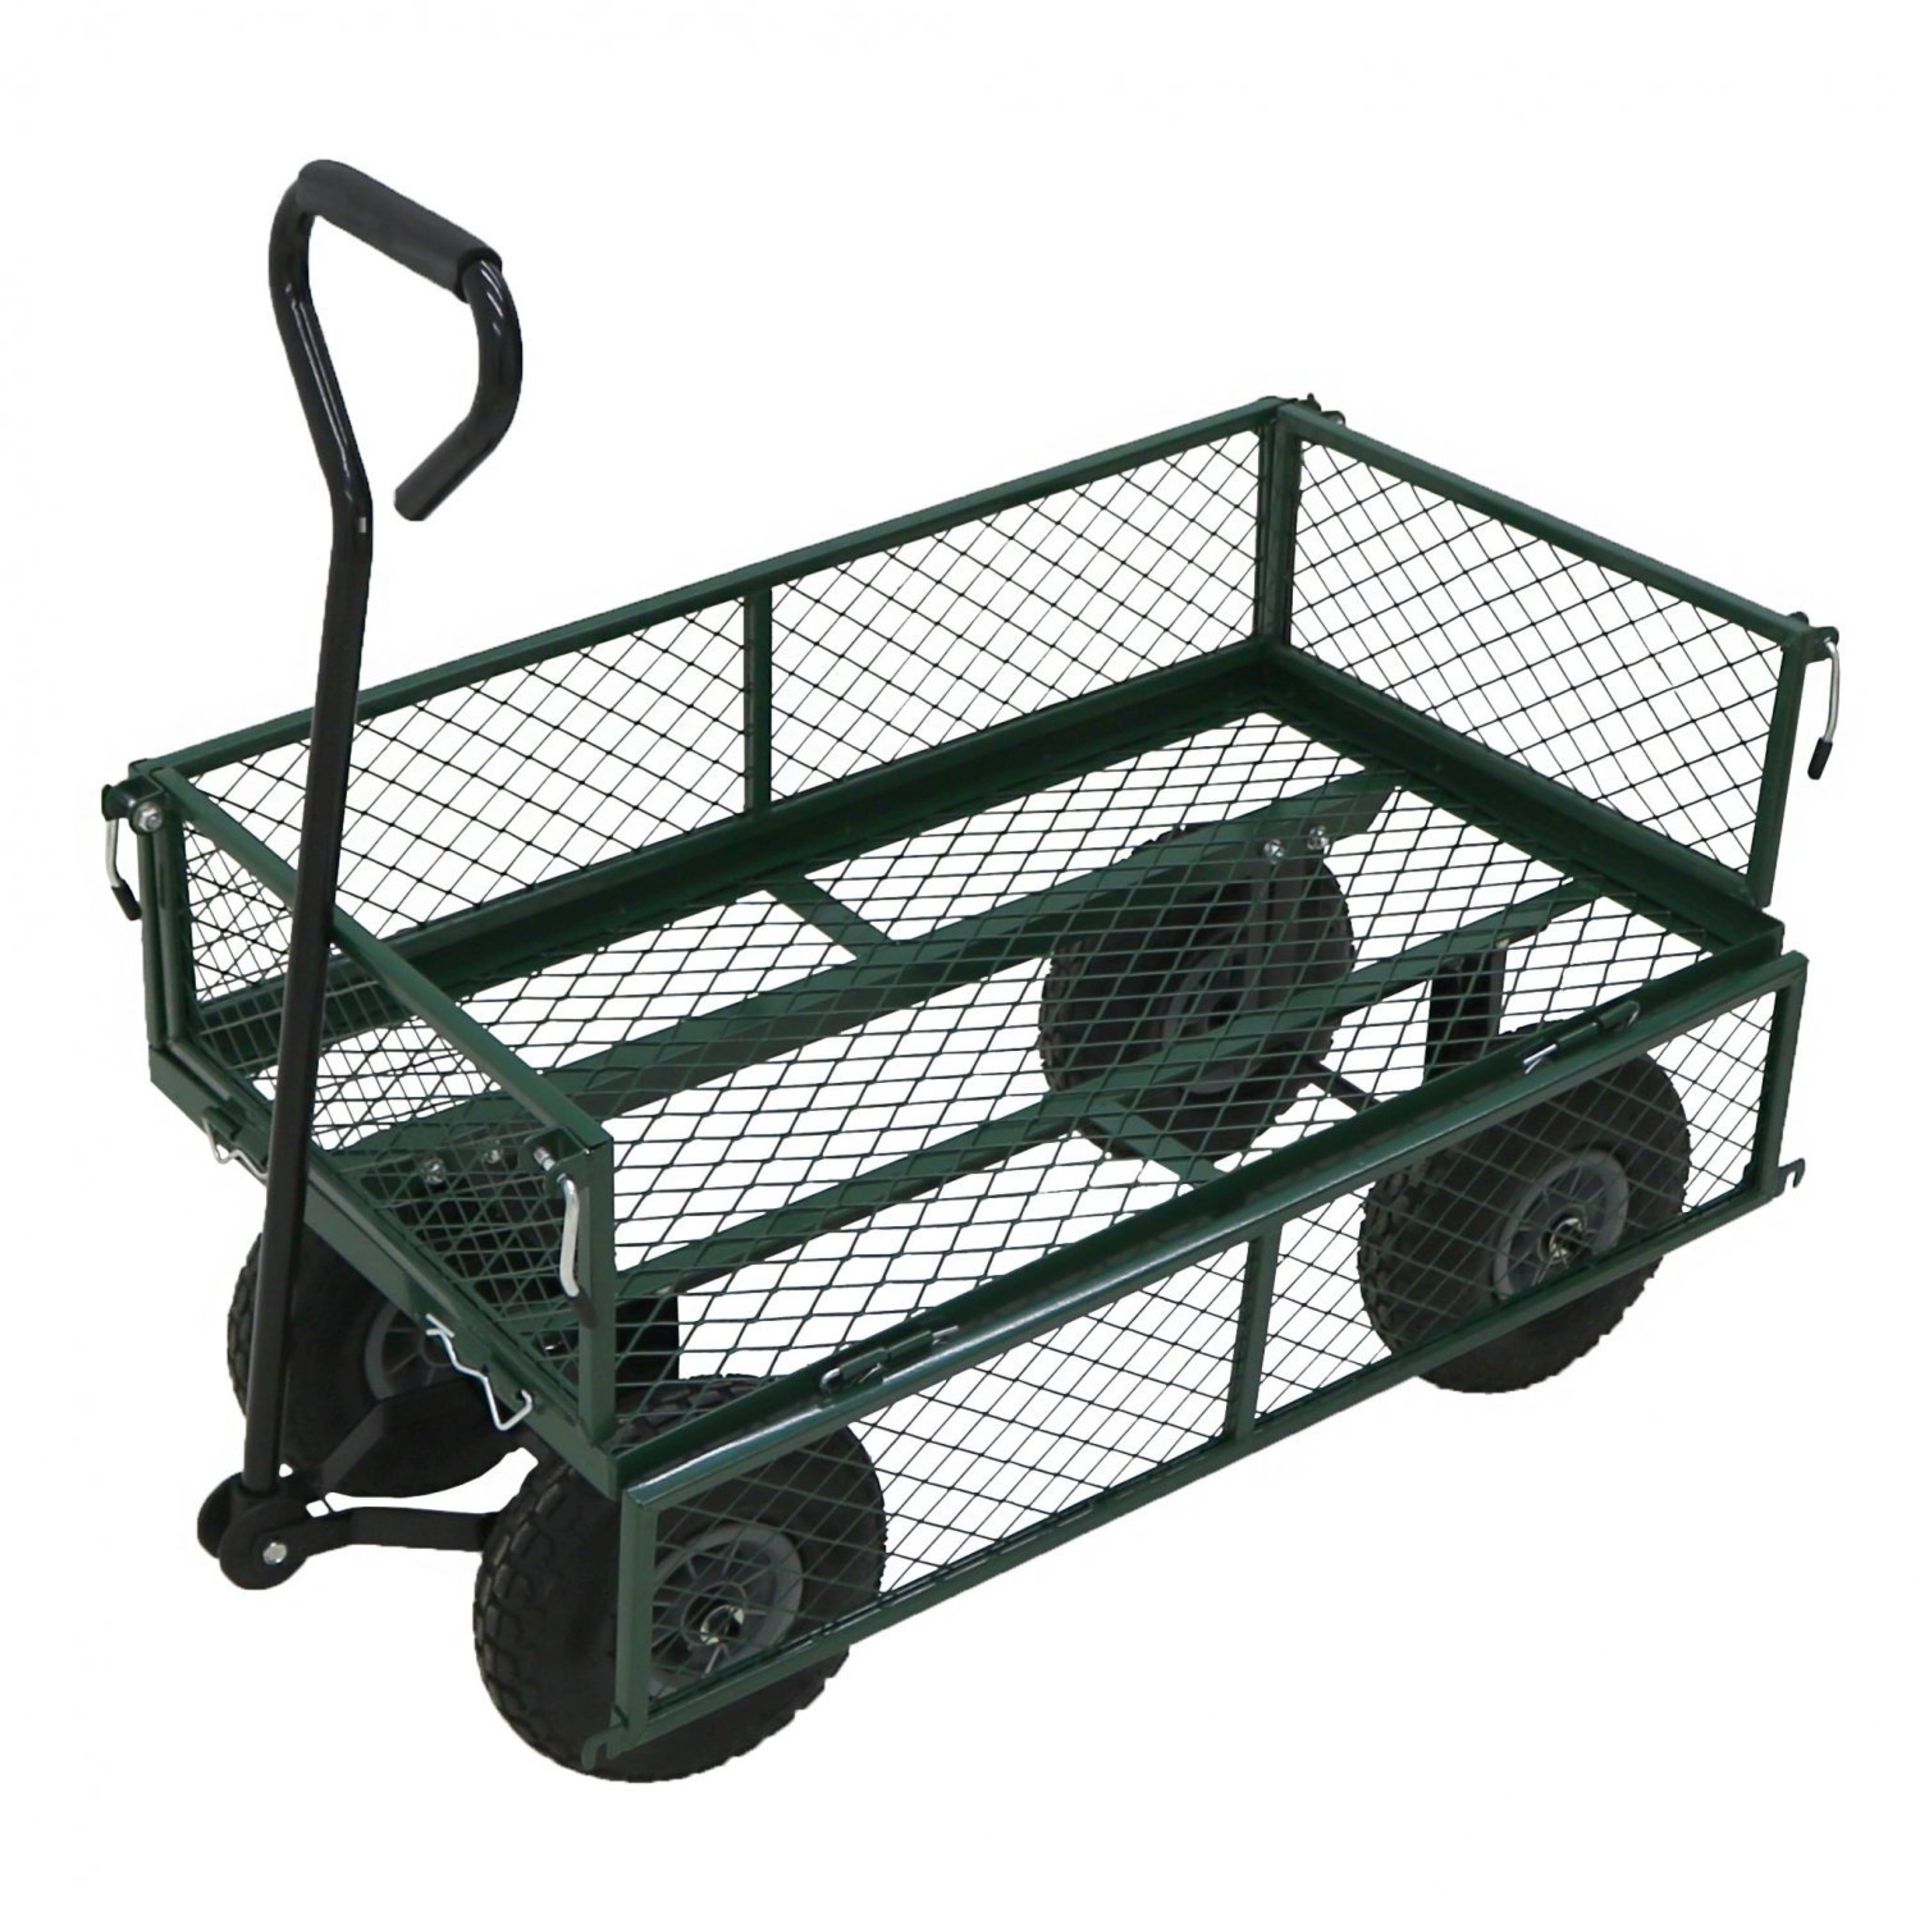 (F4) Heavy Duty Metal Gardening Trolley - Green Trailer Cart Handle For Pulling And Removable ...